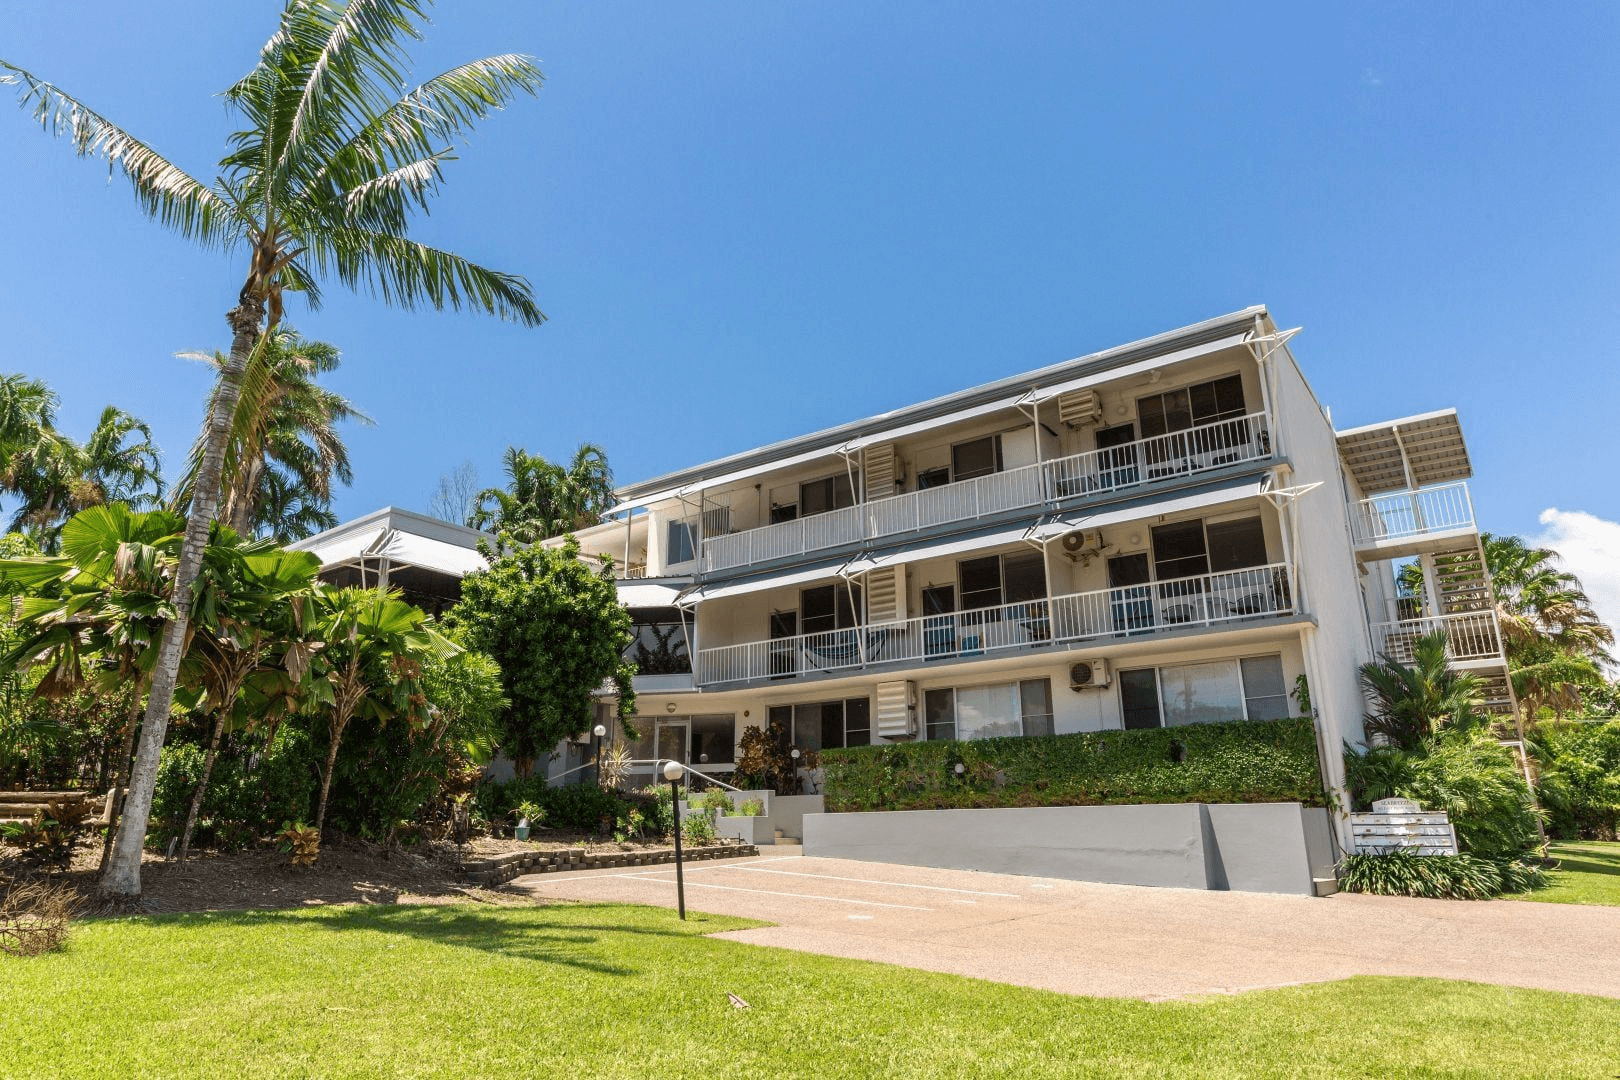 10/60 East Point Road, FANNIE BAY, NT 0820